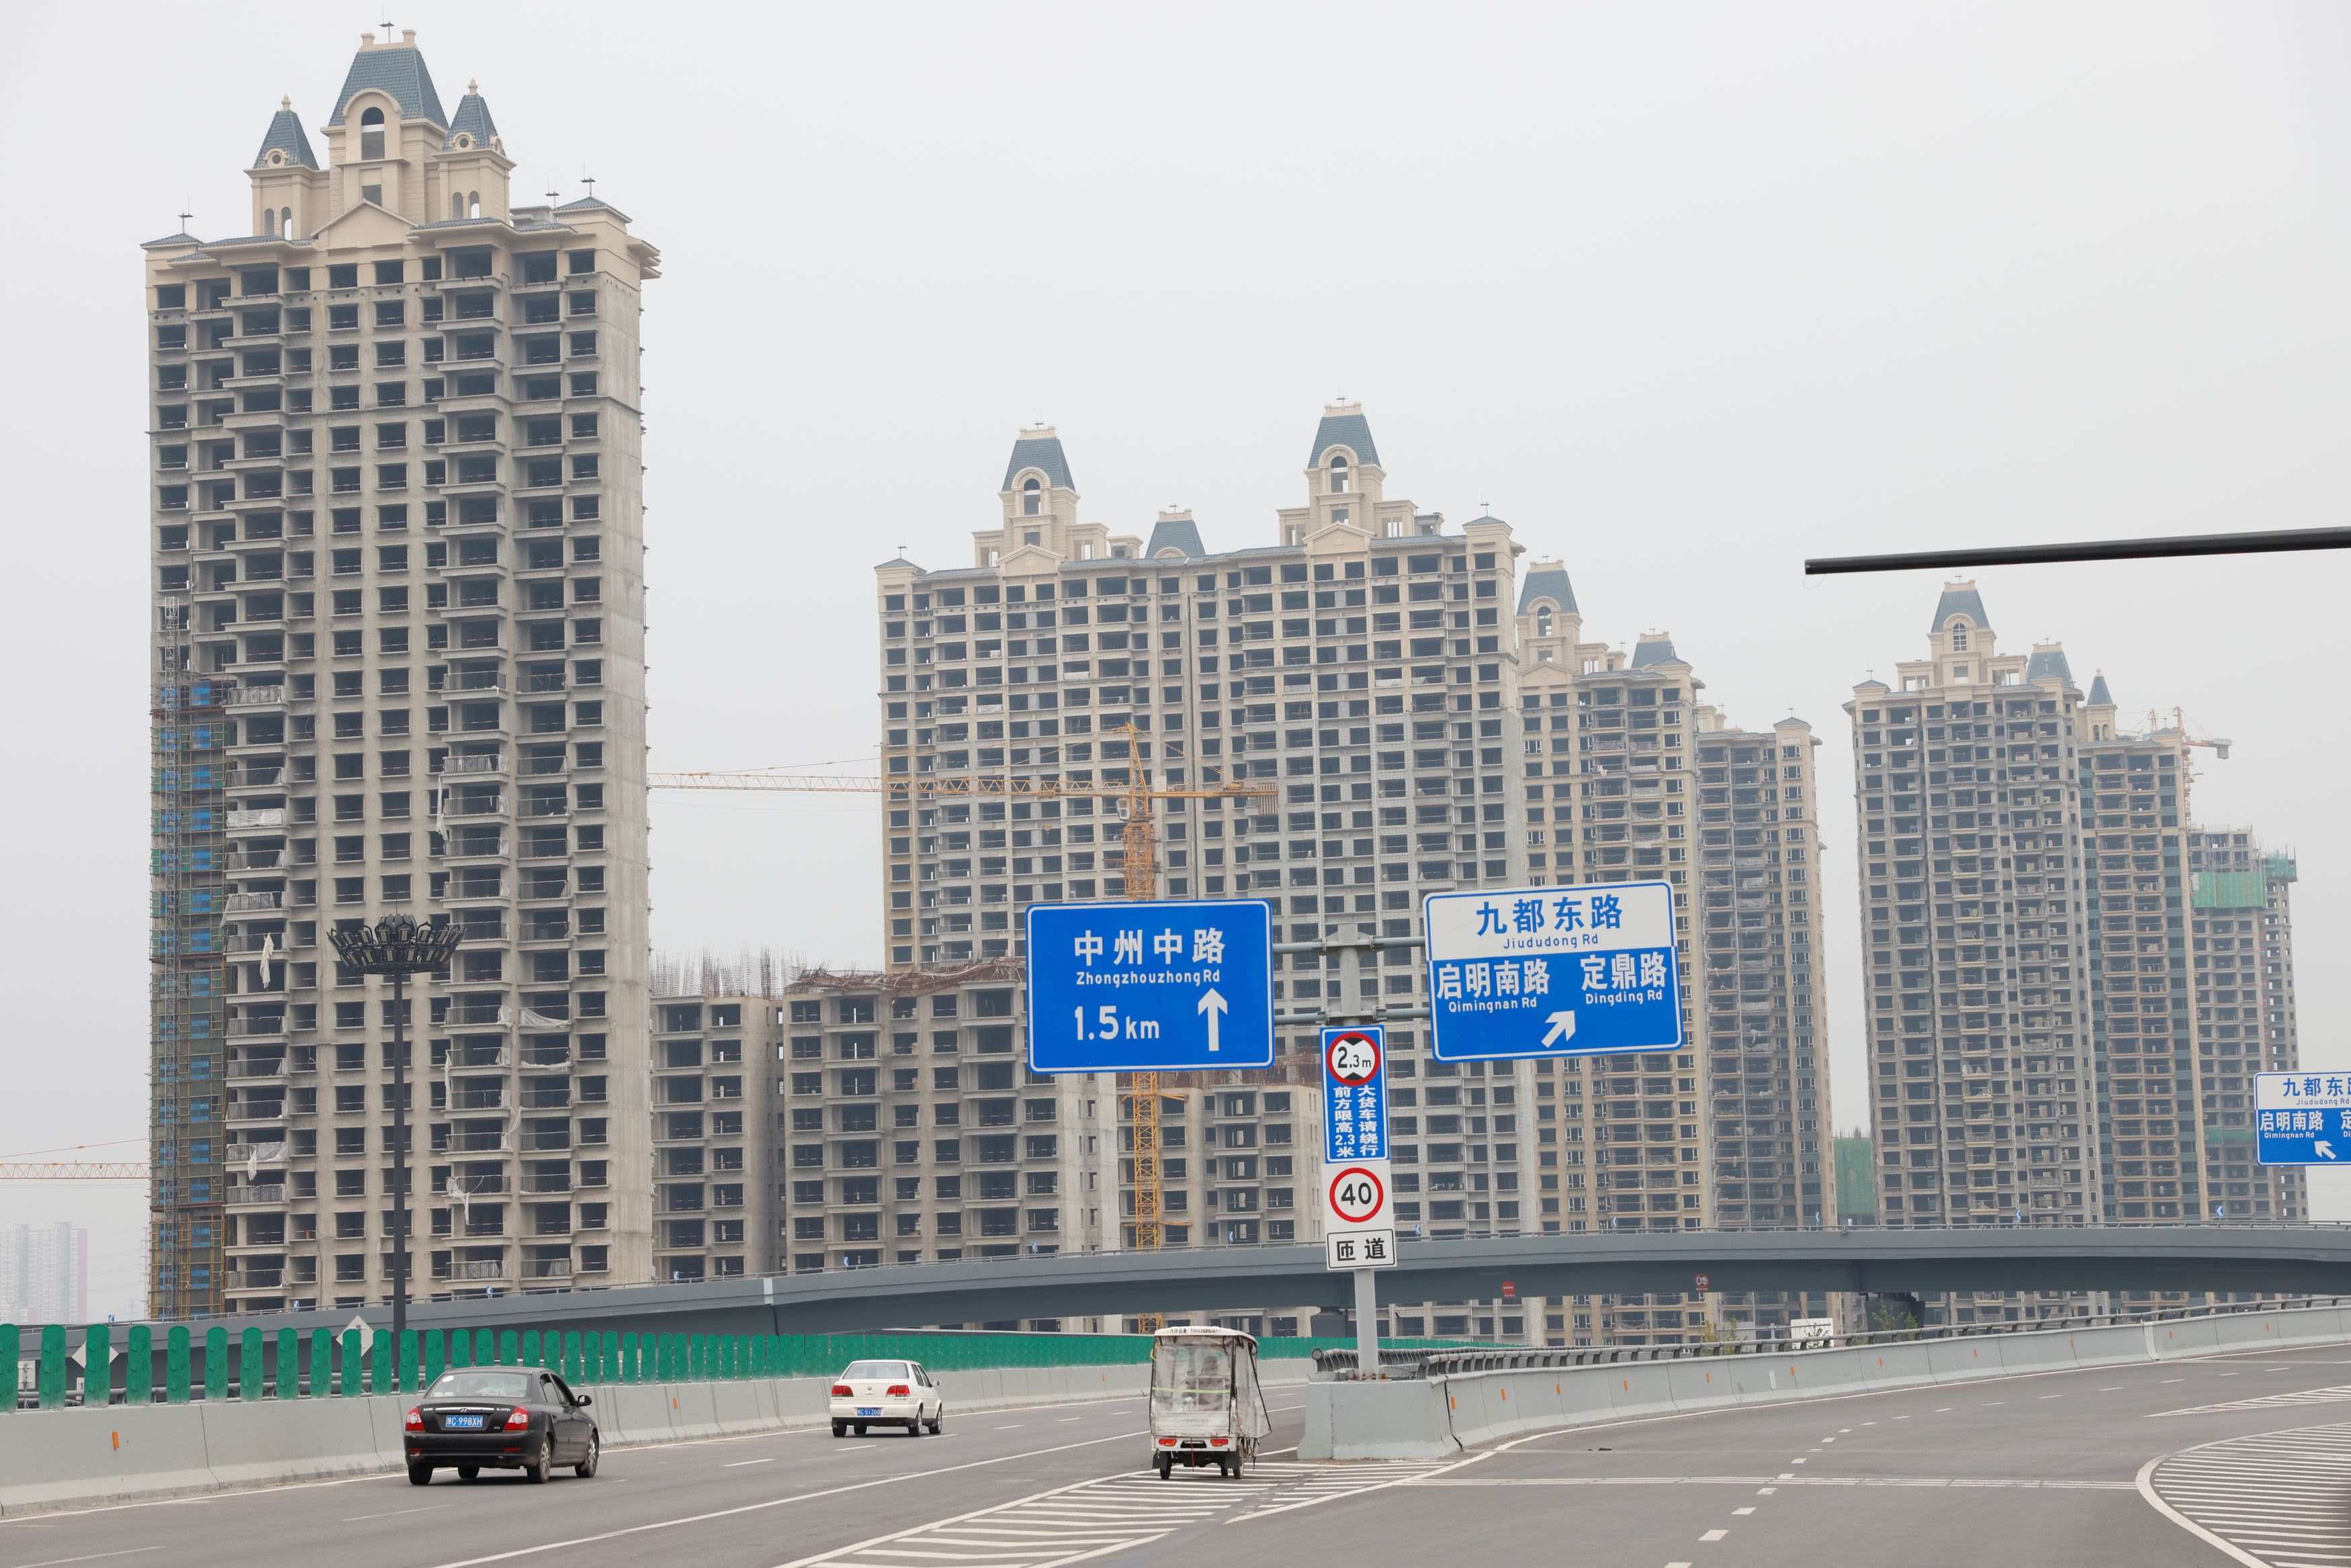 There’s a chance China might finally put taxes on property